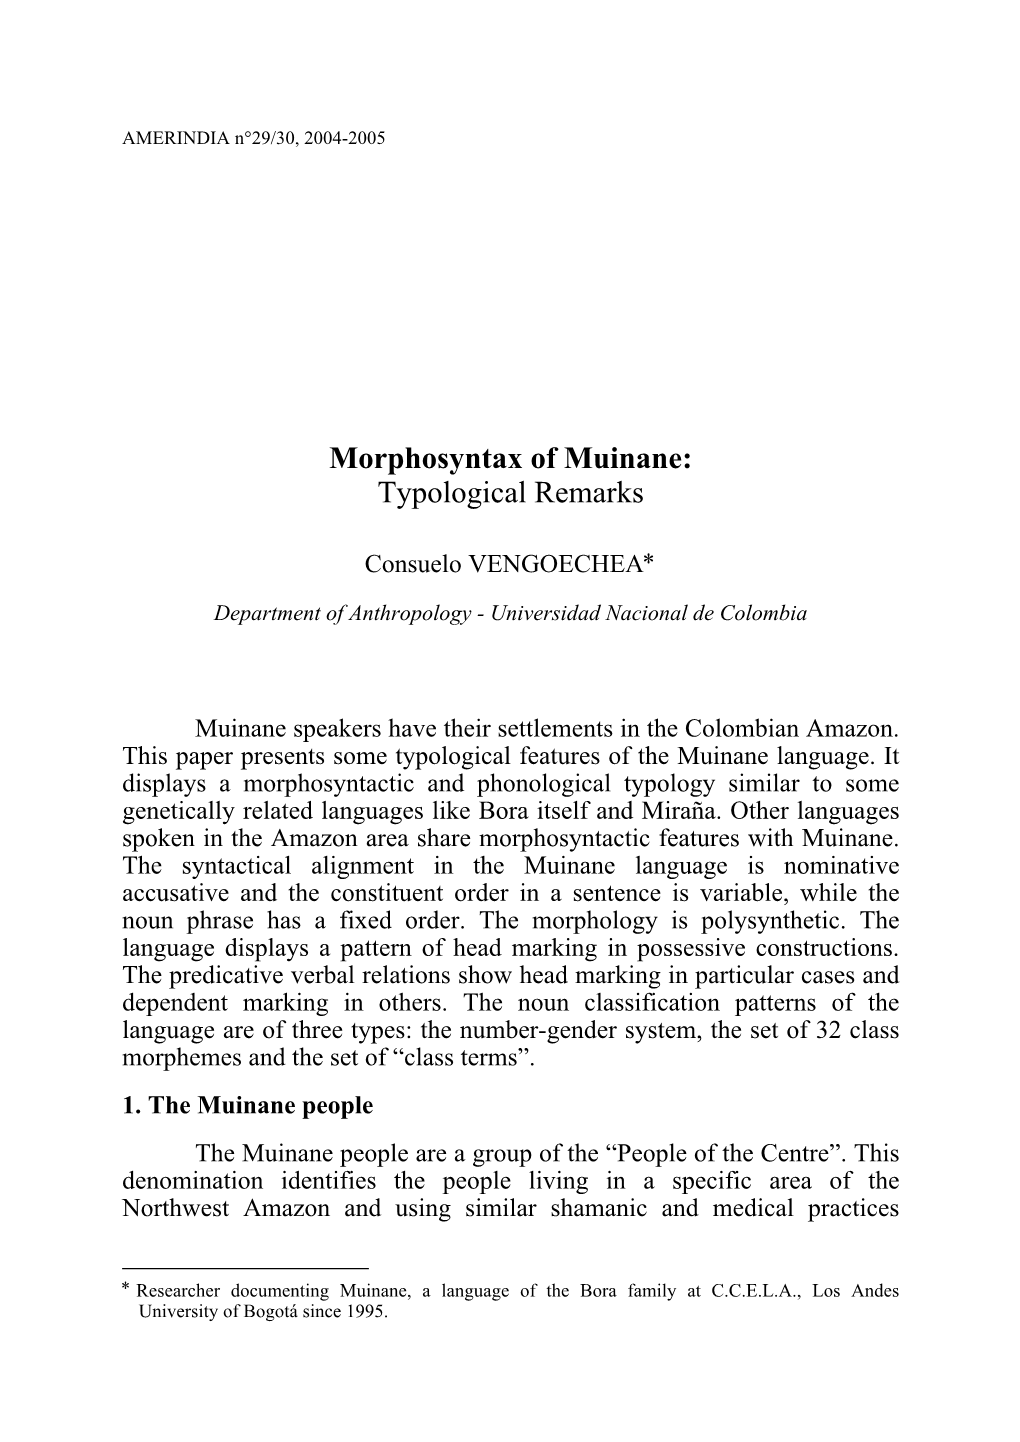 Morphosyntax of Muinane: Typological Remarks